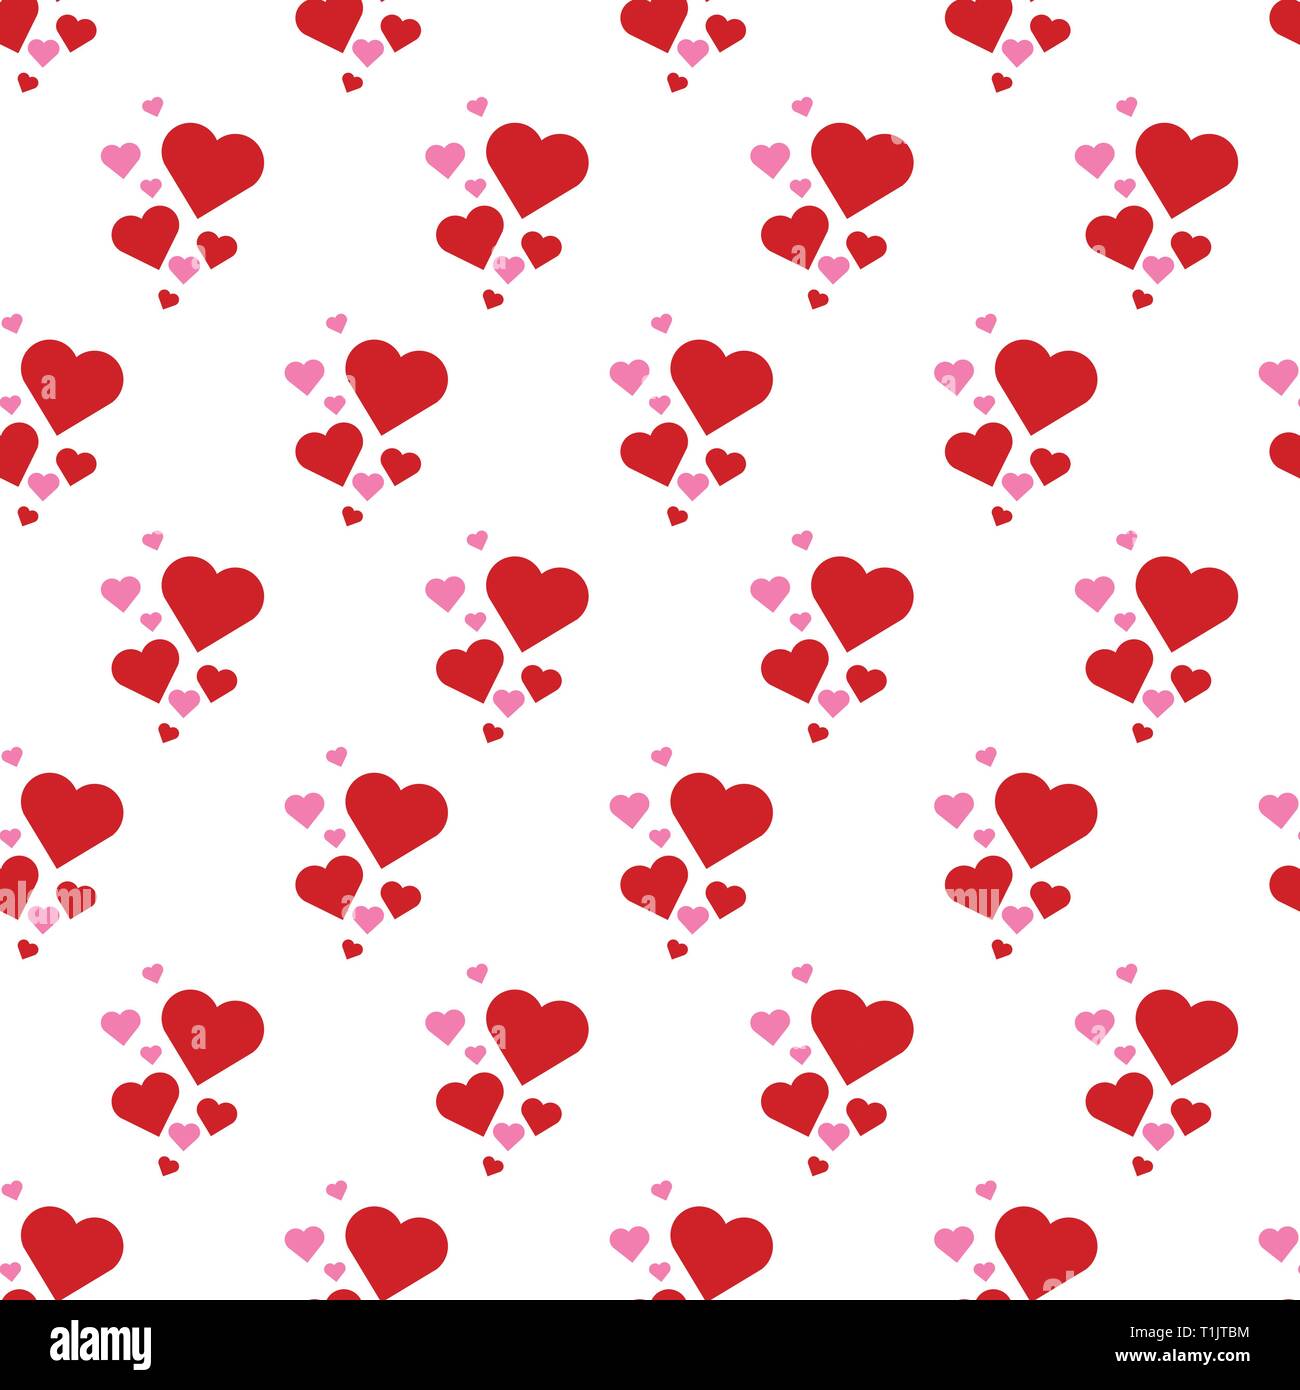 Heart shapes pattern combination in groups & combinations making geometrical designs & wallpaper style patterns Stock Vector